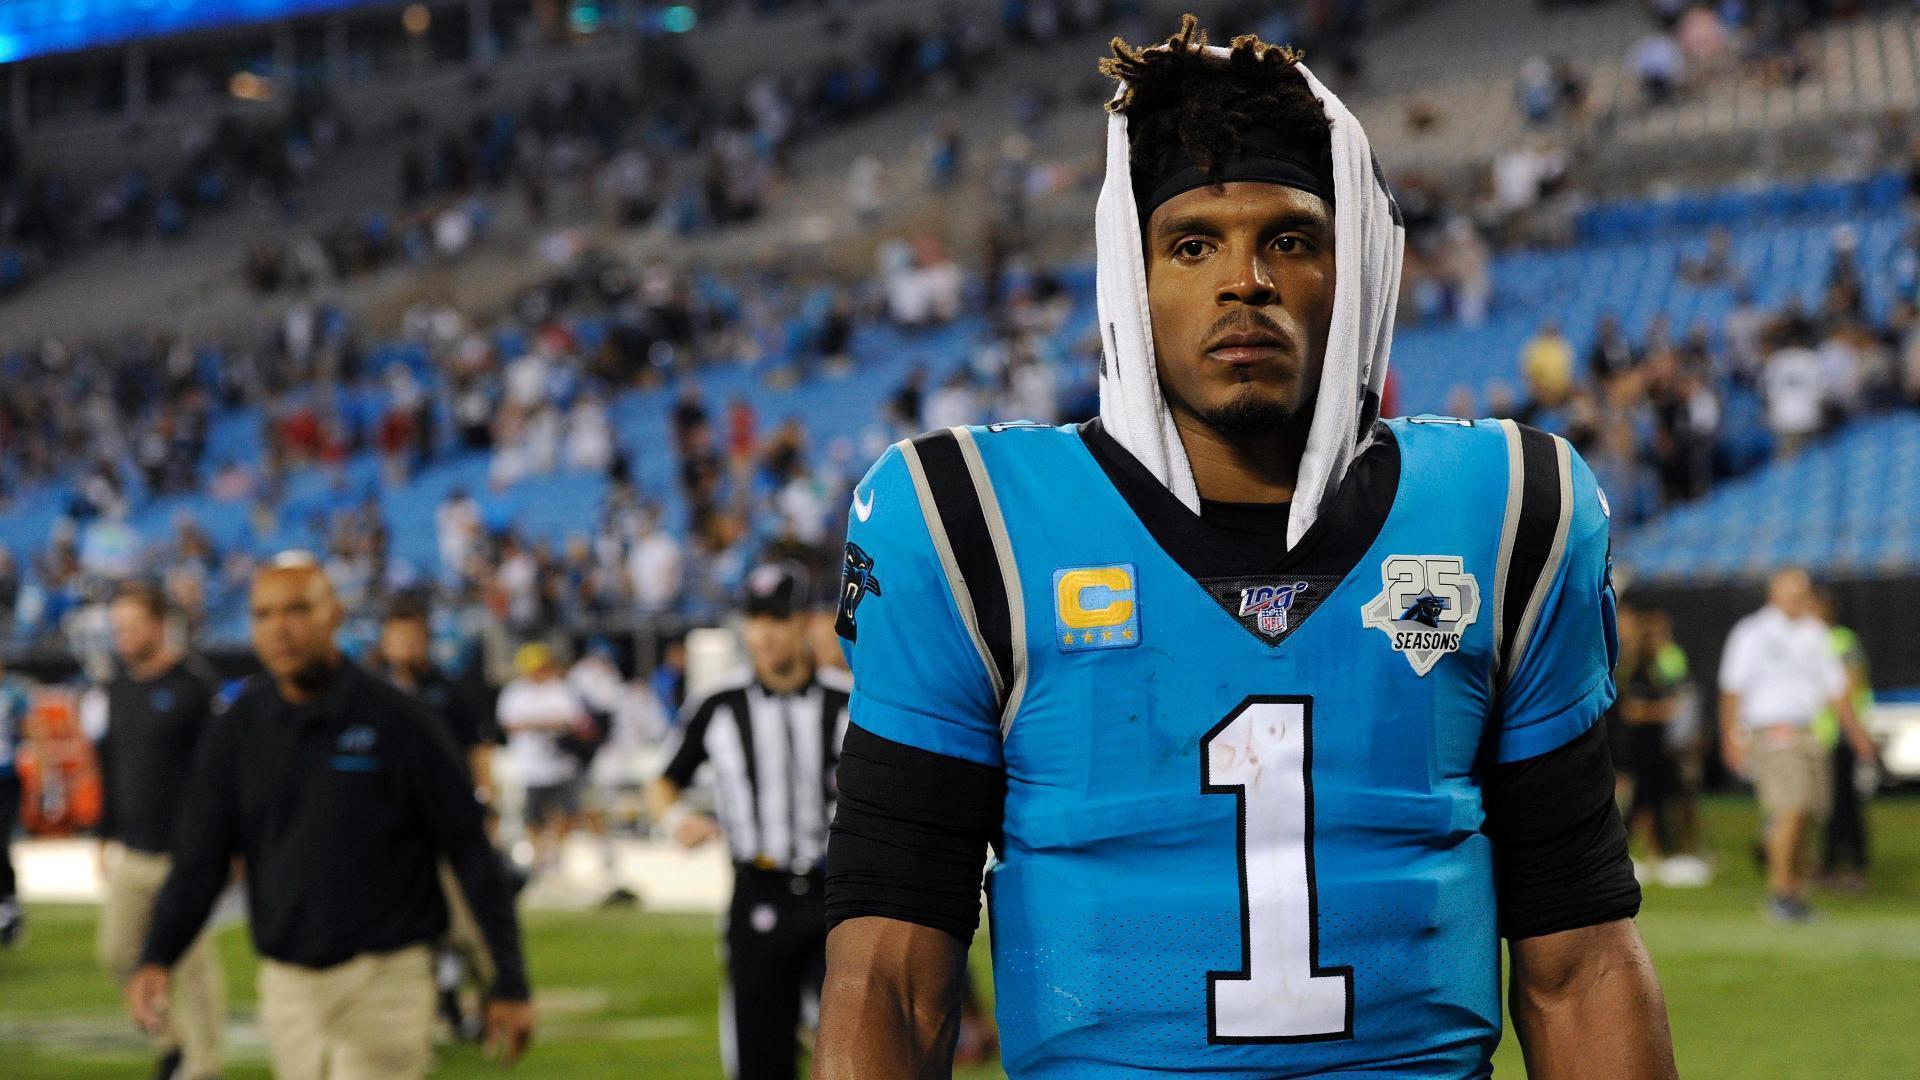 Cam denies that he asked Panthers for a trade